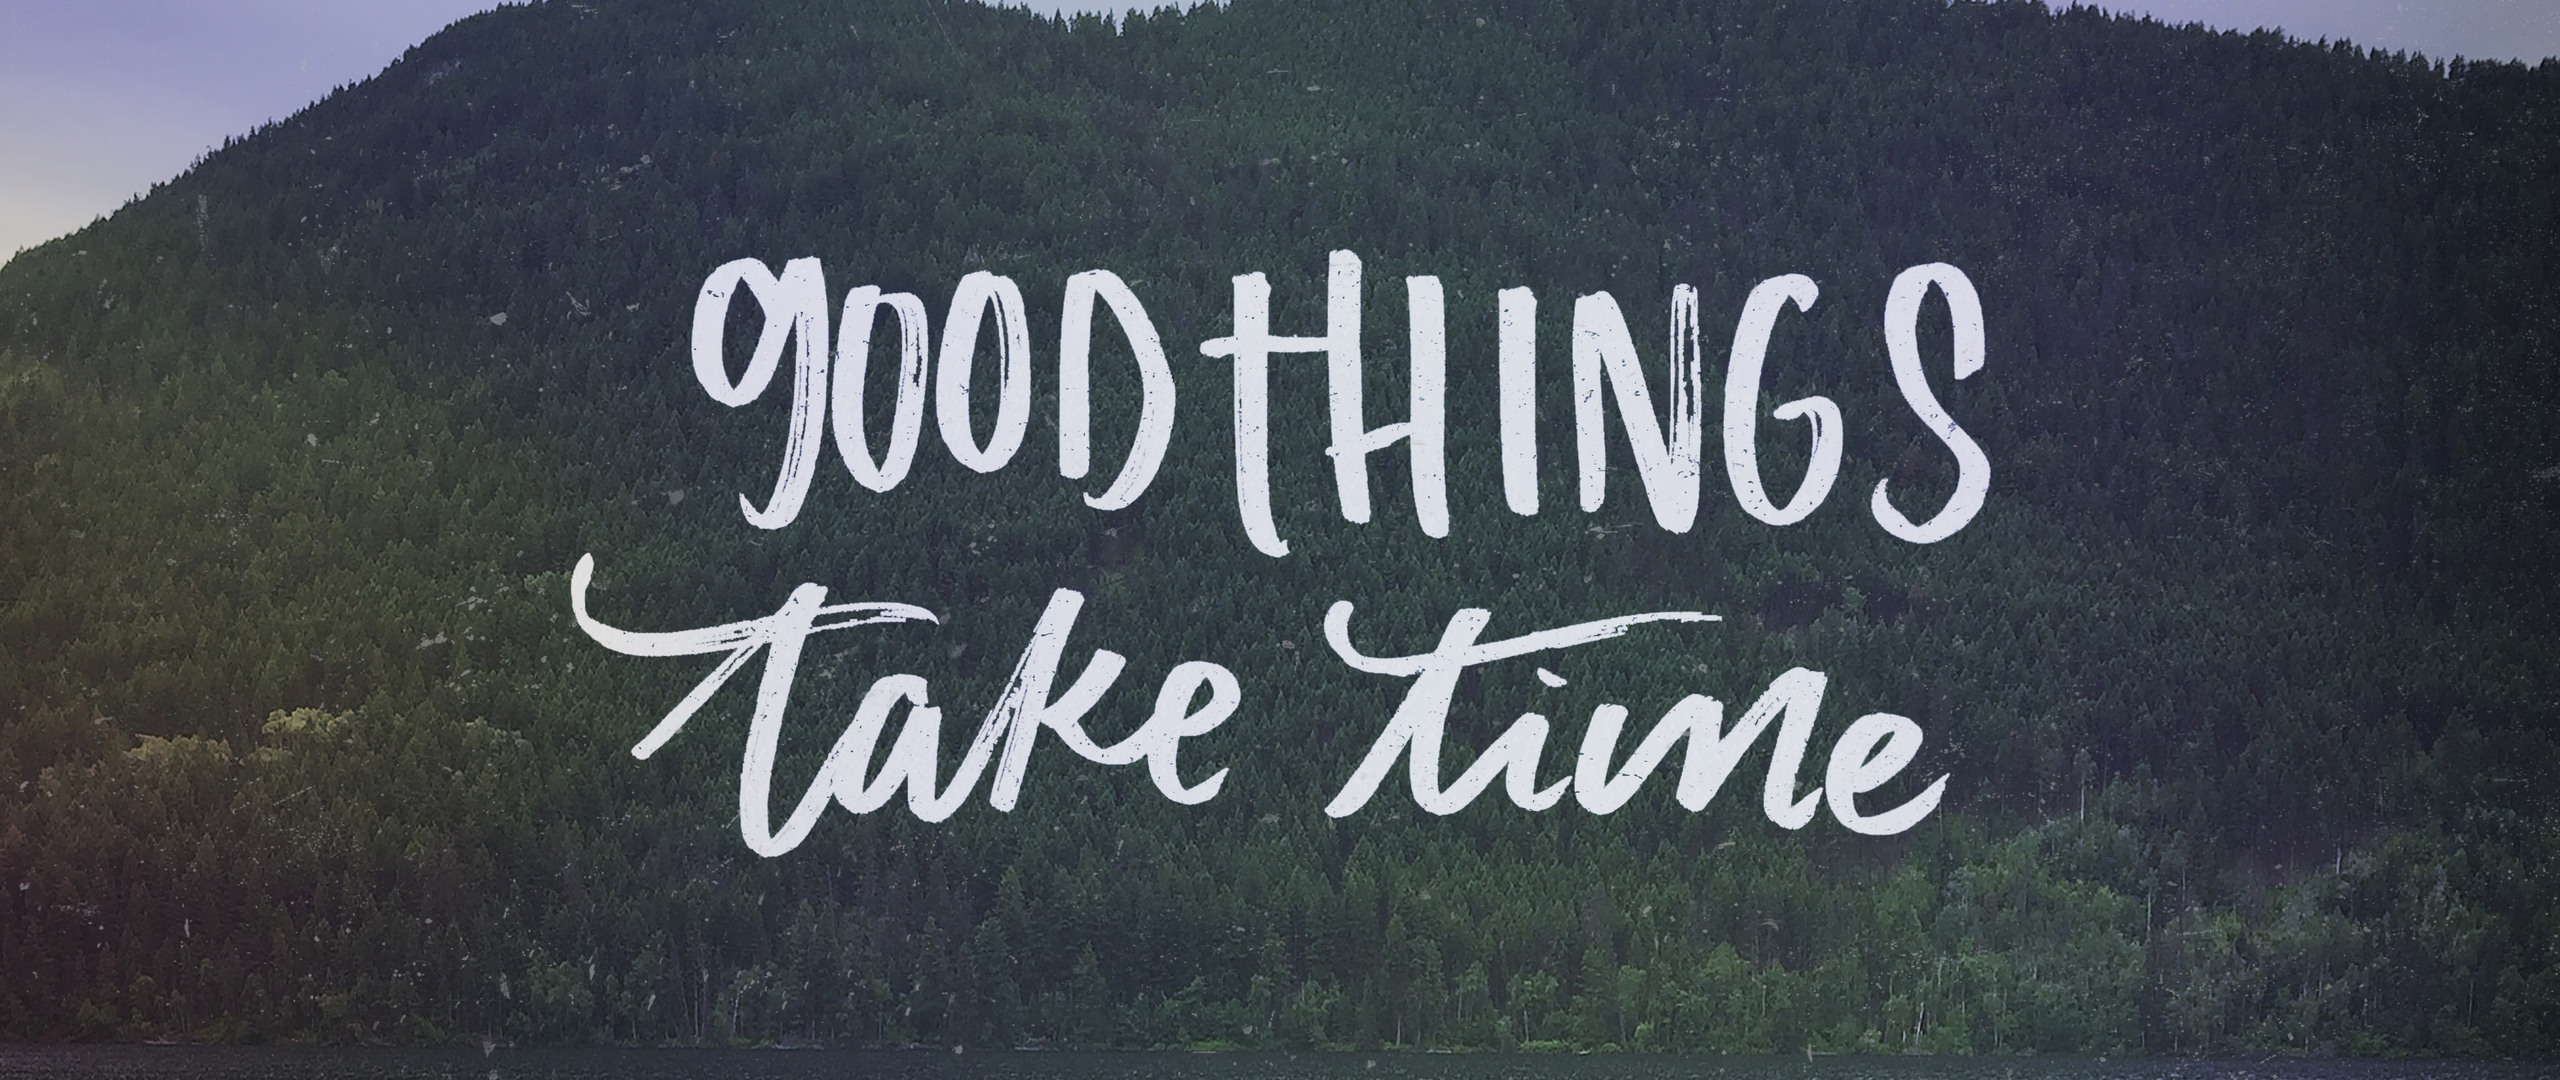 2560x1080 Good Things Take Time 2560x1080 Resolution HD 4k Wallpapers